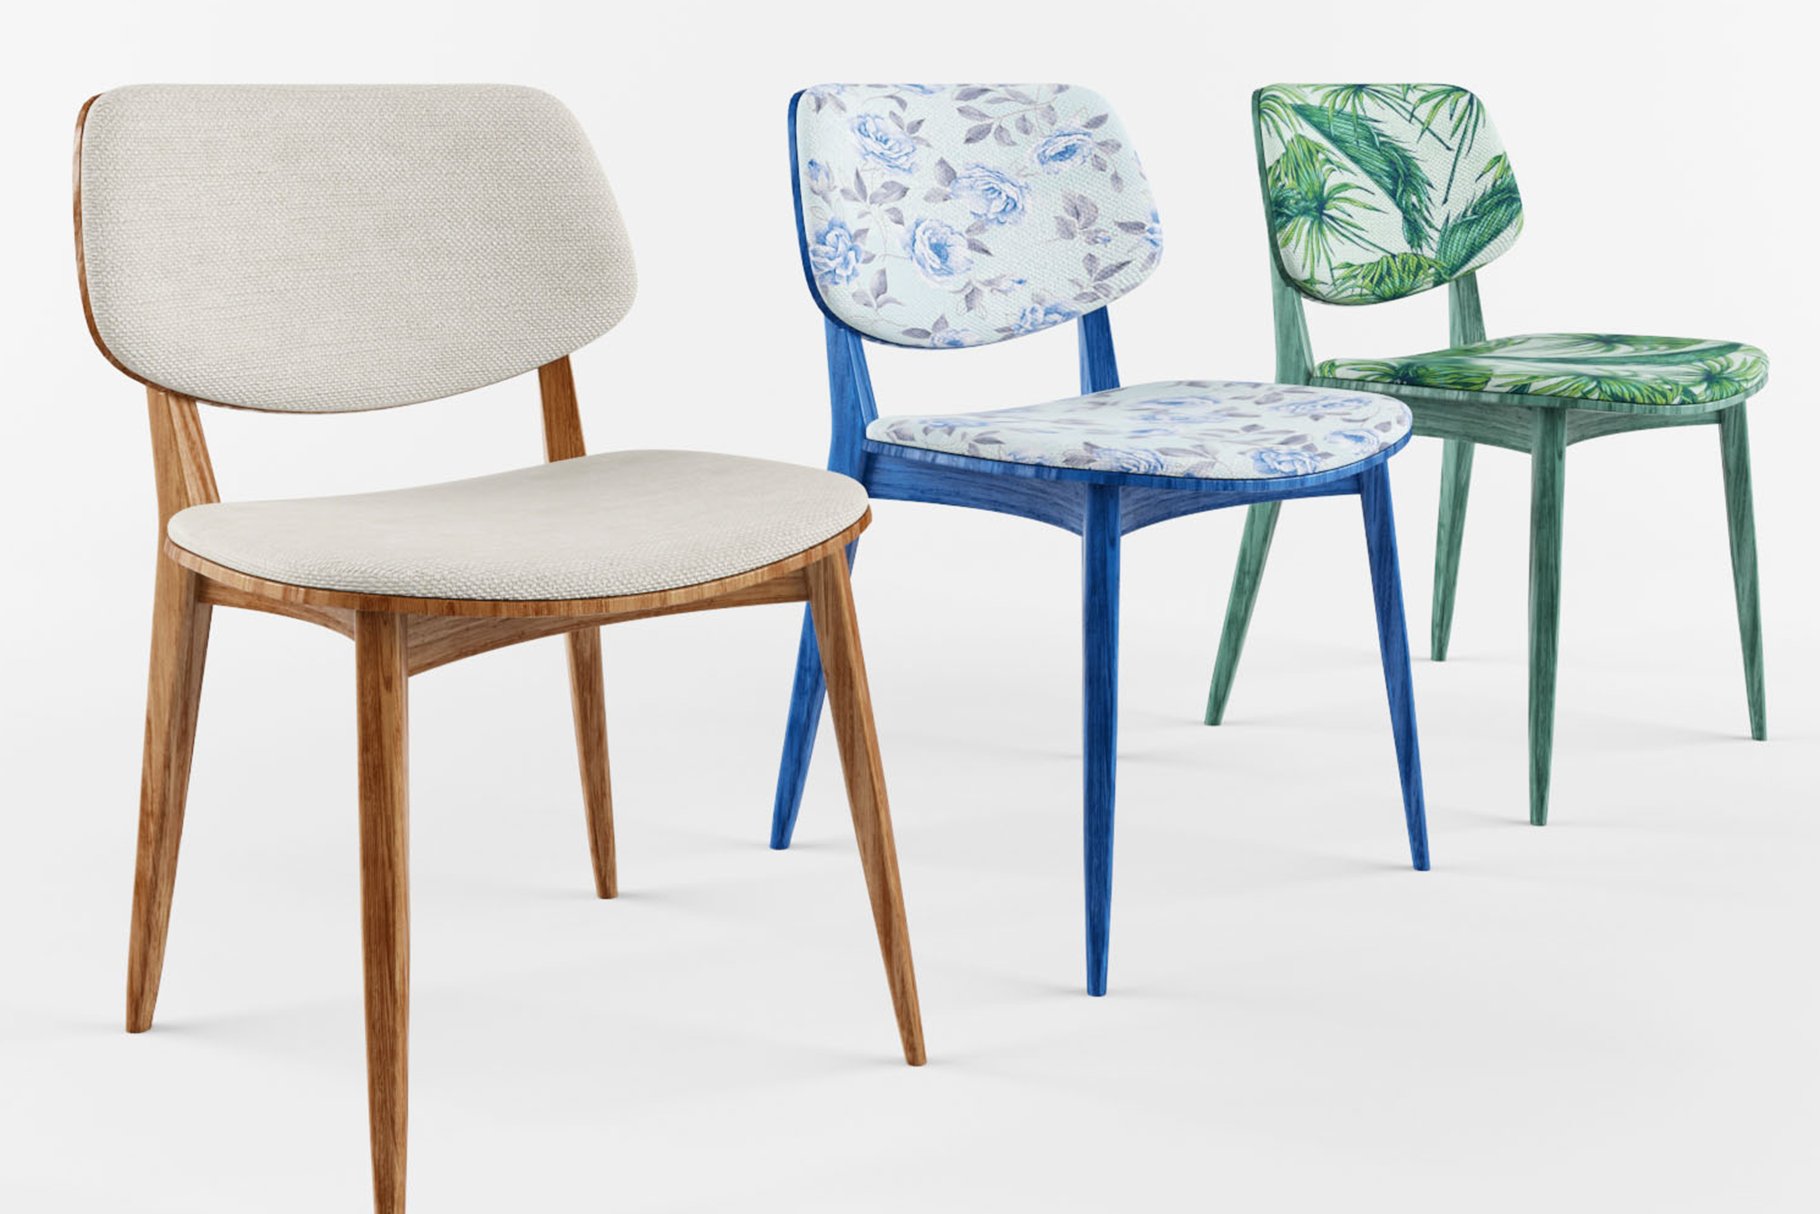 Rendering of a wonderful 3d model of chairs in various colors